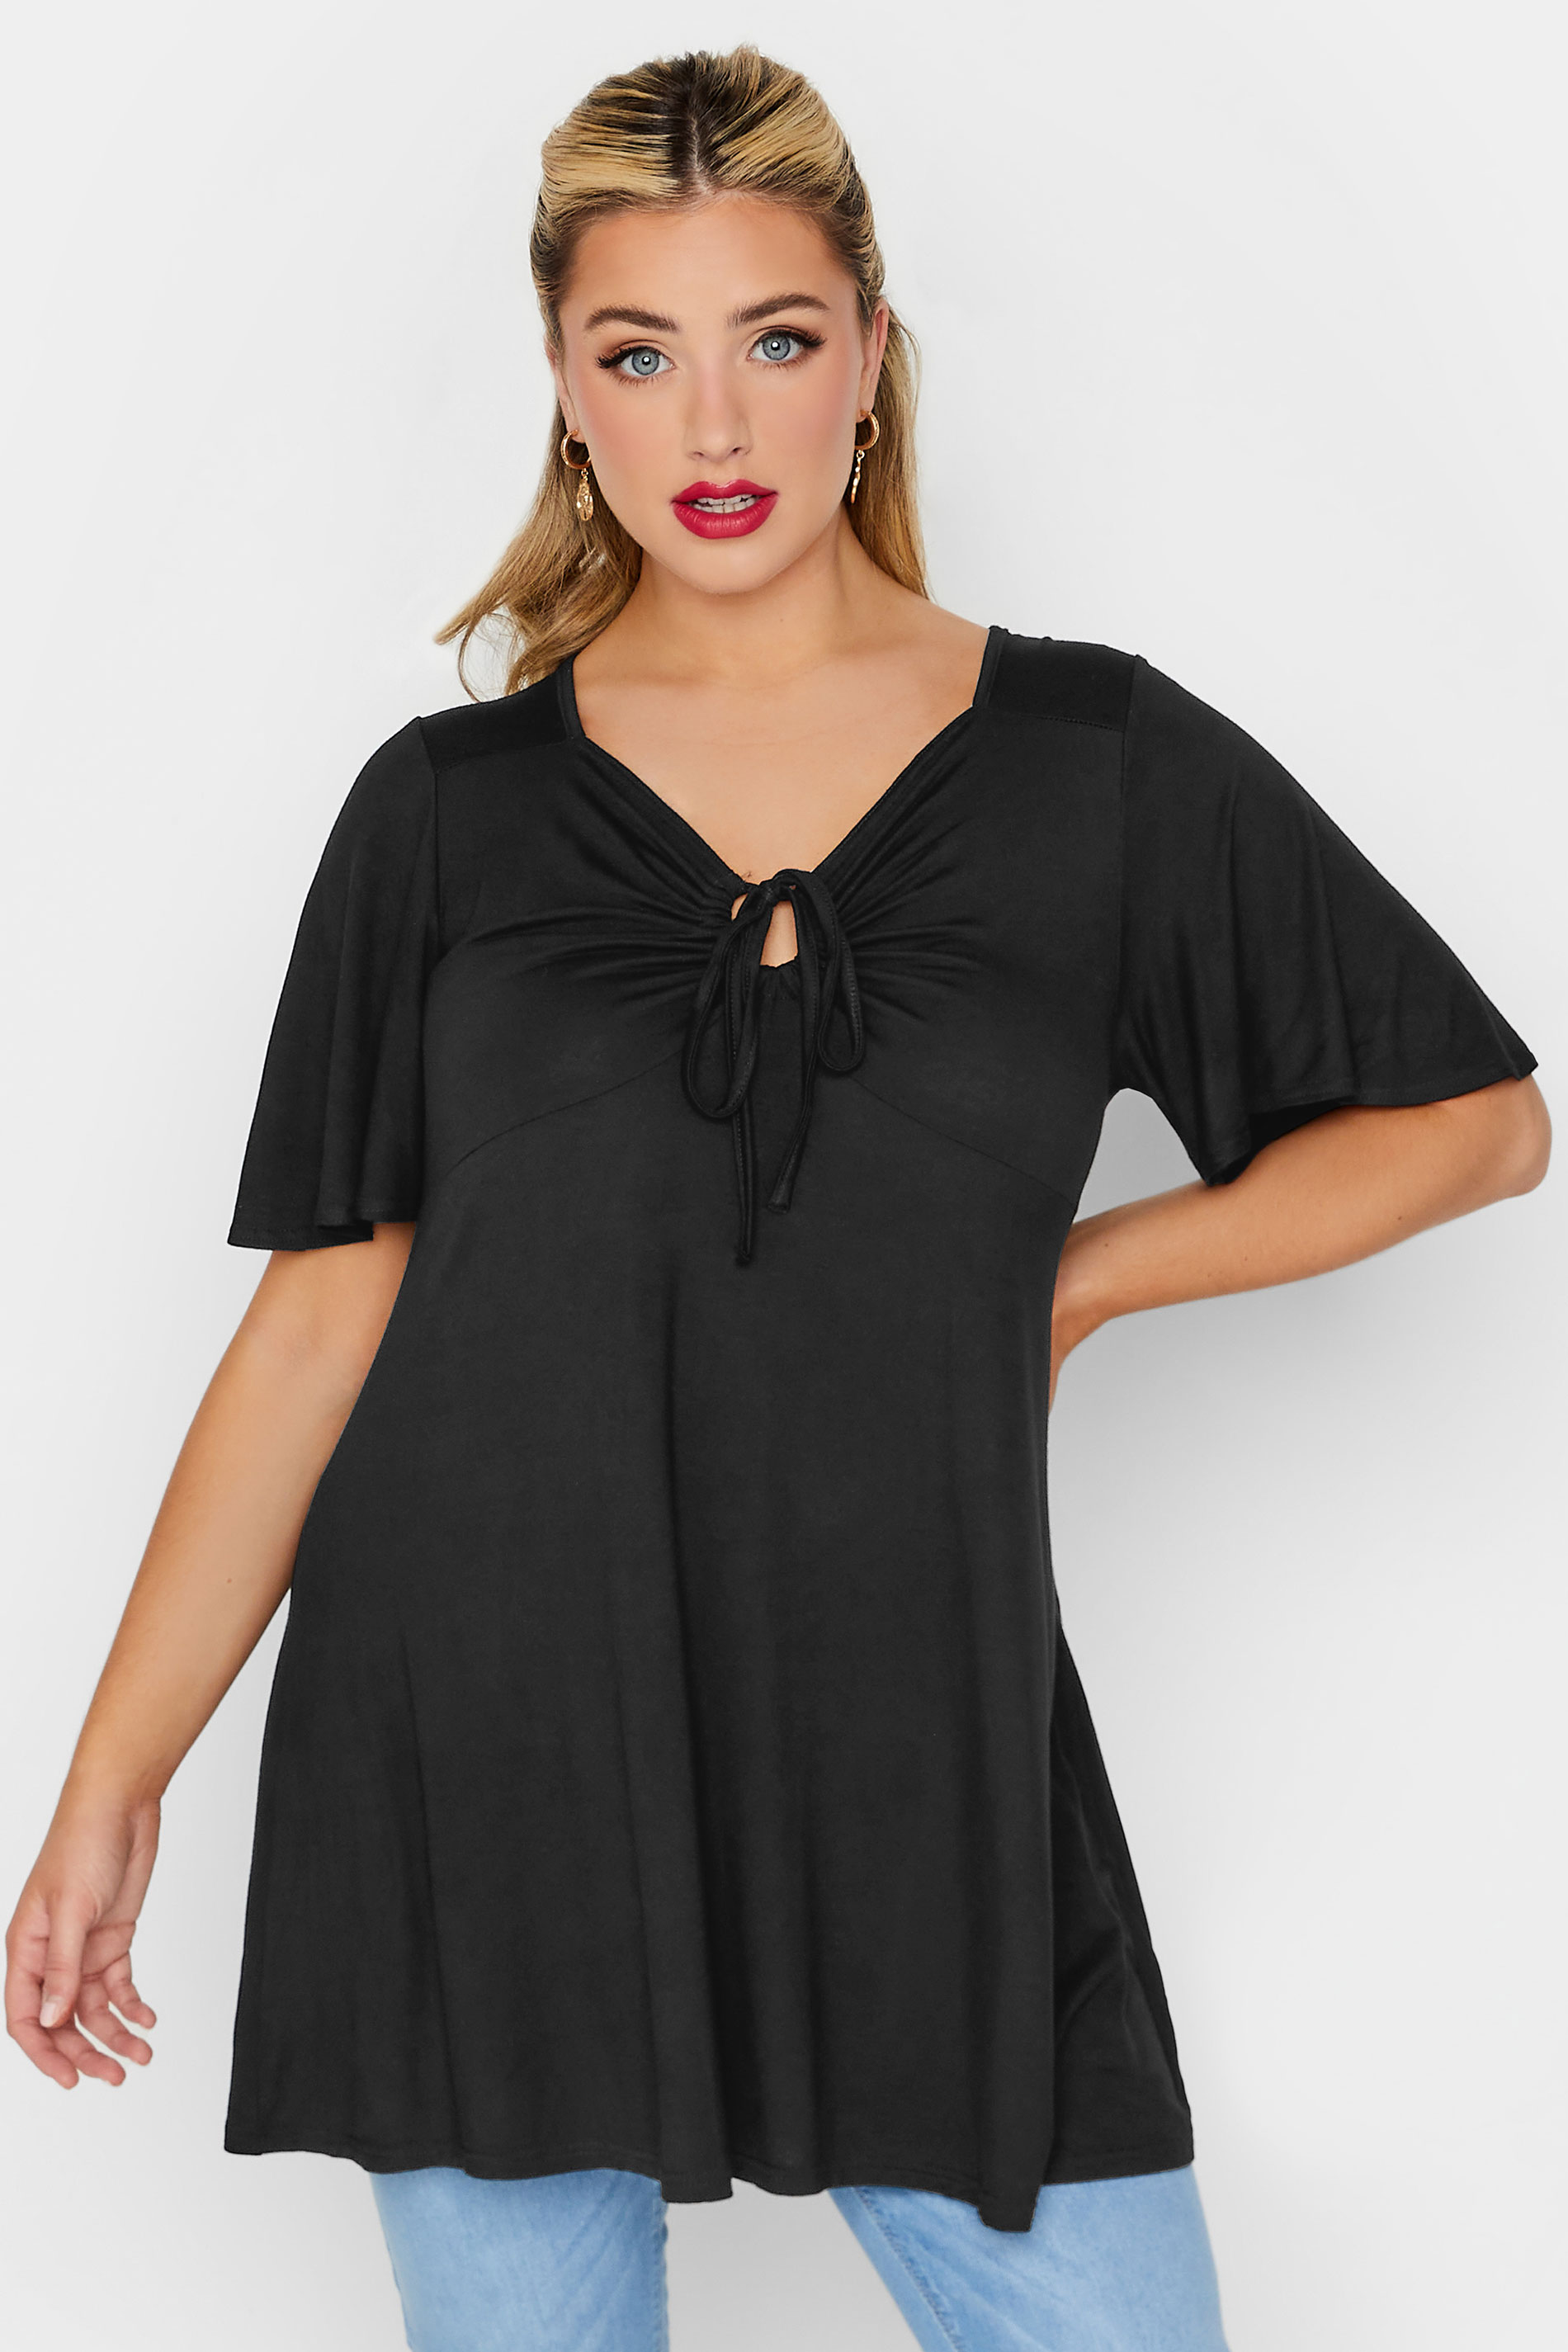 LIMITED COLLECTION Curve Plus Size Black Tie Neck Top | Yours Clothing  2